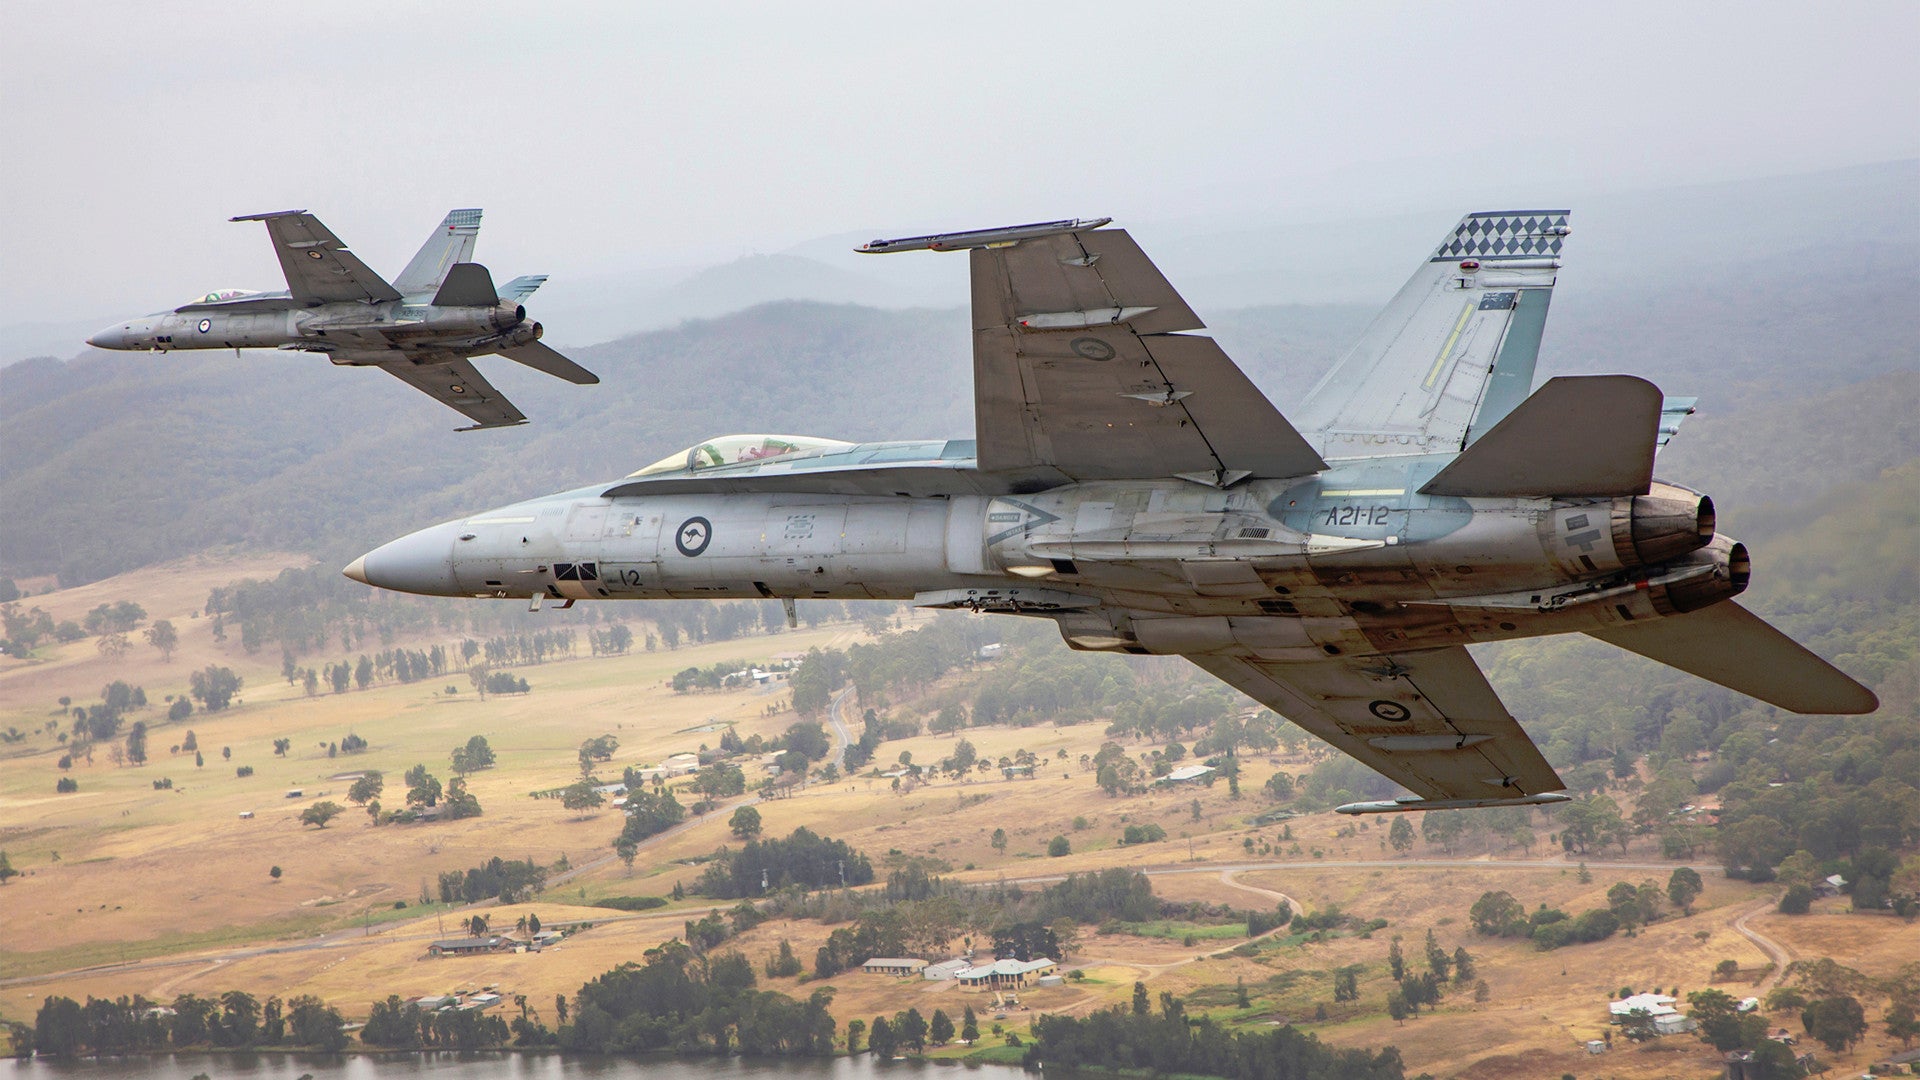 Australia To Sell Retired F A 18 Hornet Fighters To Private Aggressor Firm Air USA